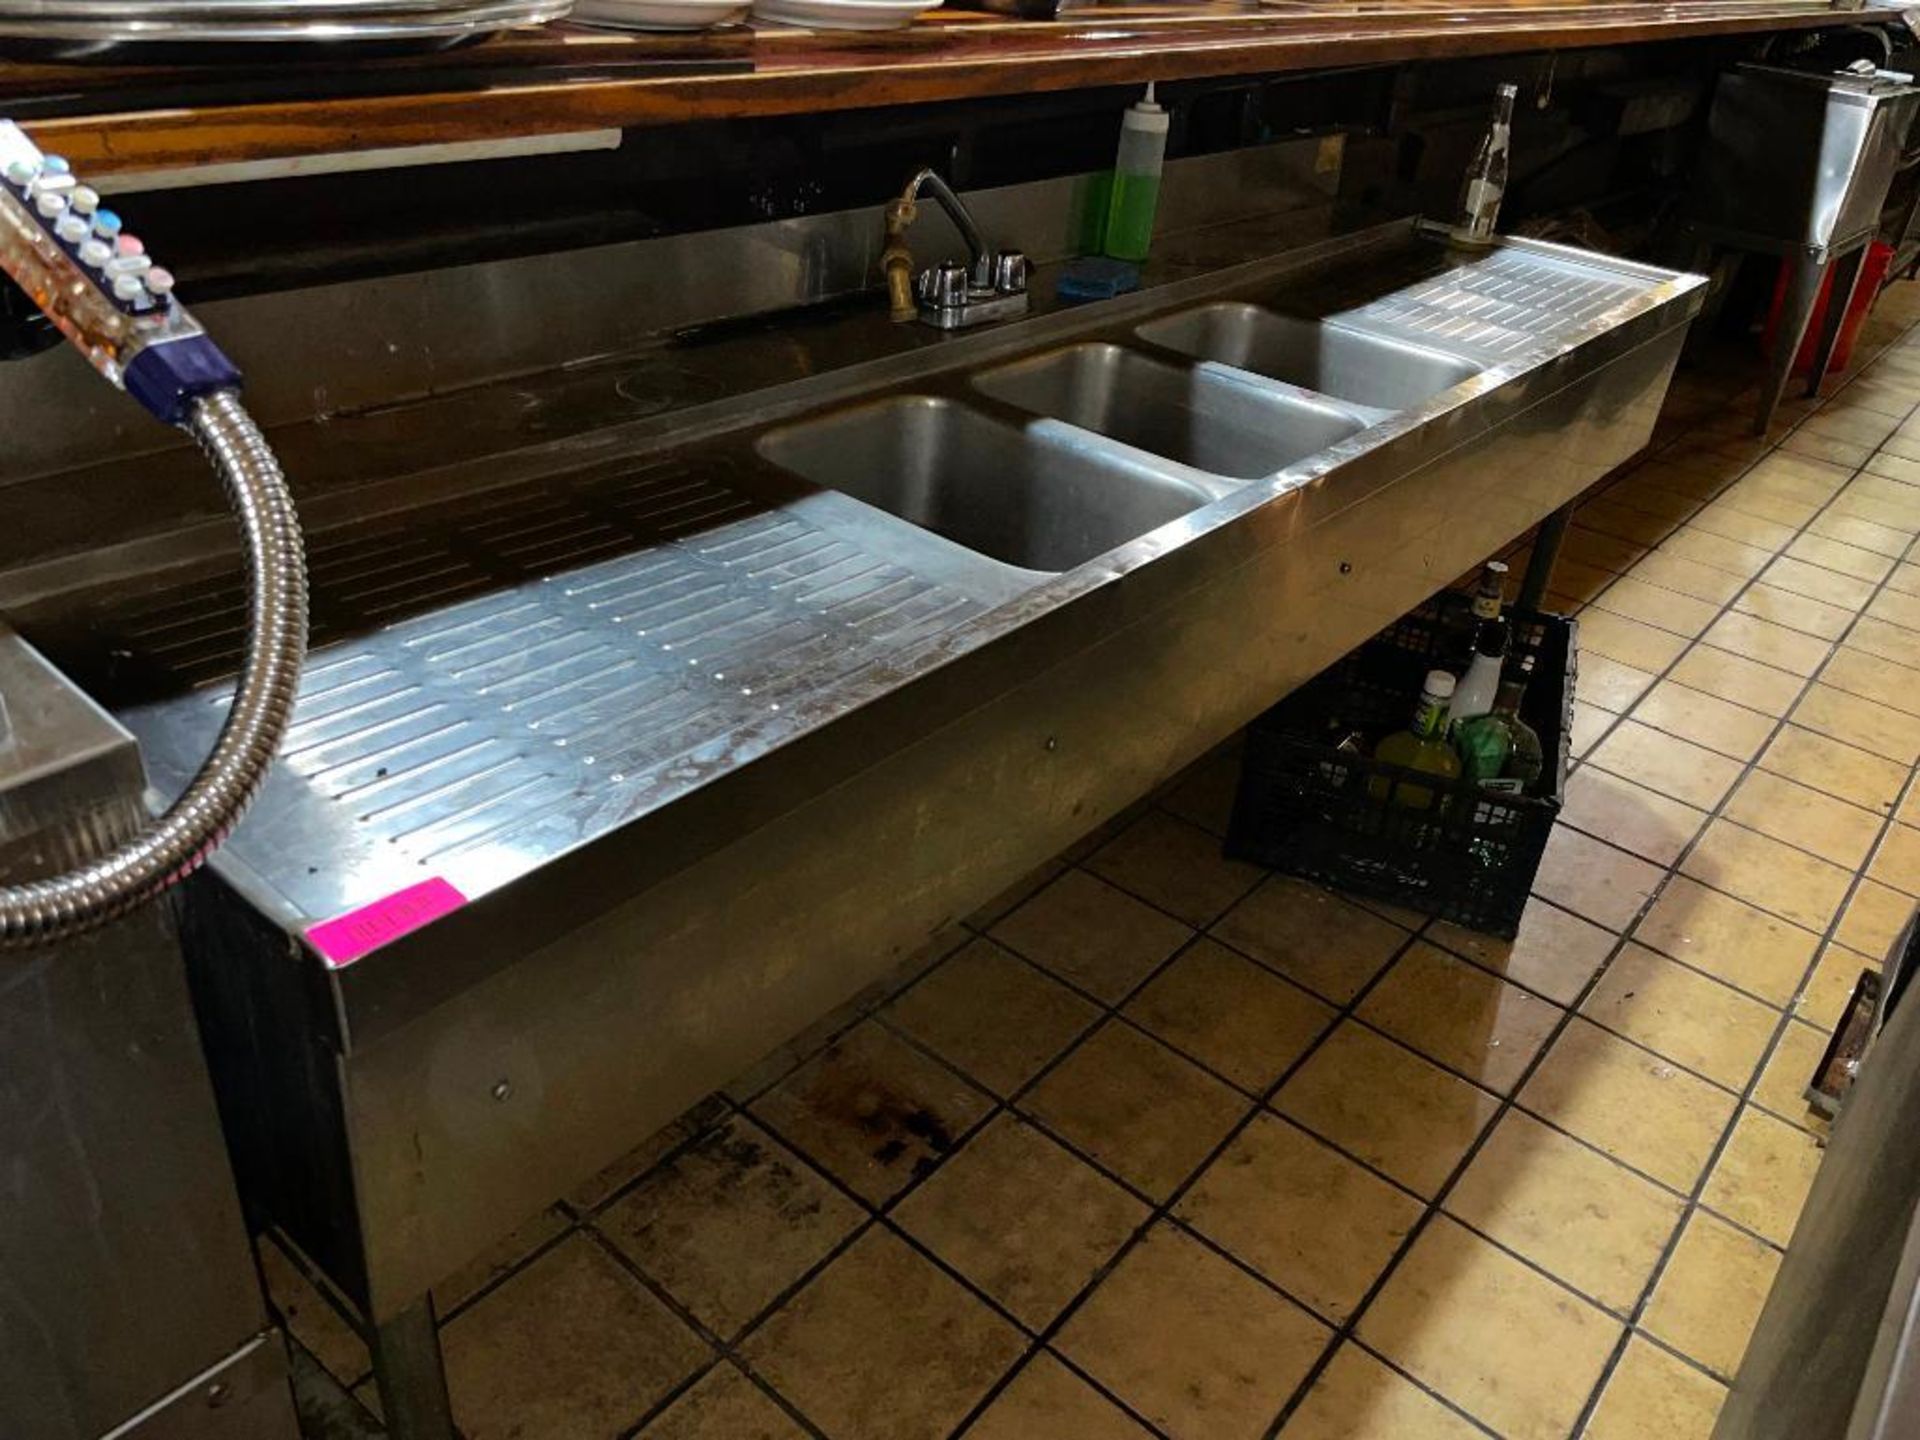 DESCRIPTION: 7' THREE WELL STAINLESS BAR SINK W/ LEFT AND RIGHT DRY BOARDS. ADDITIONAL INFORMATION S